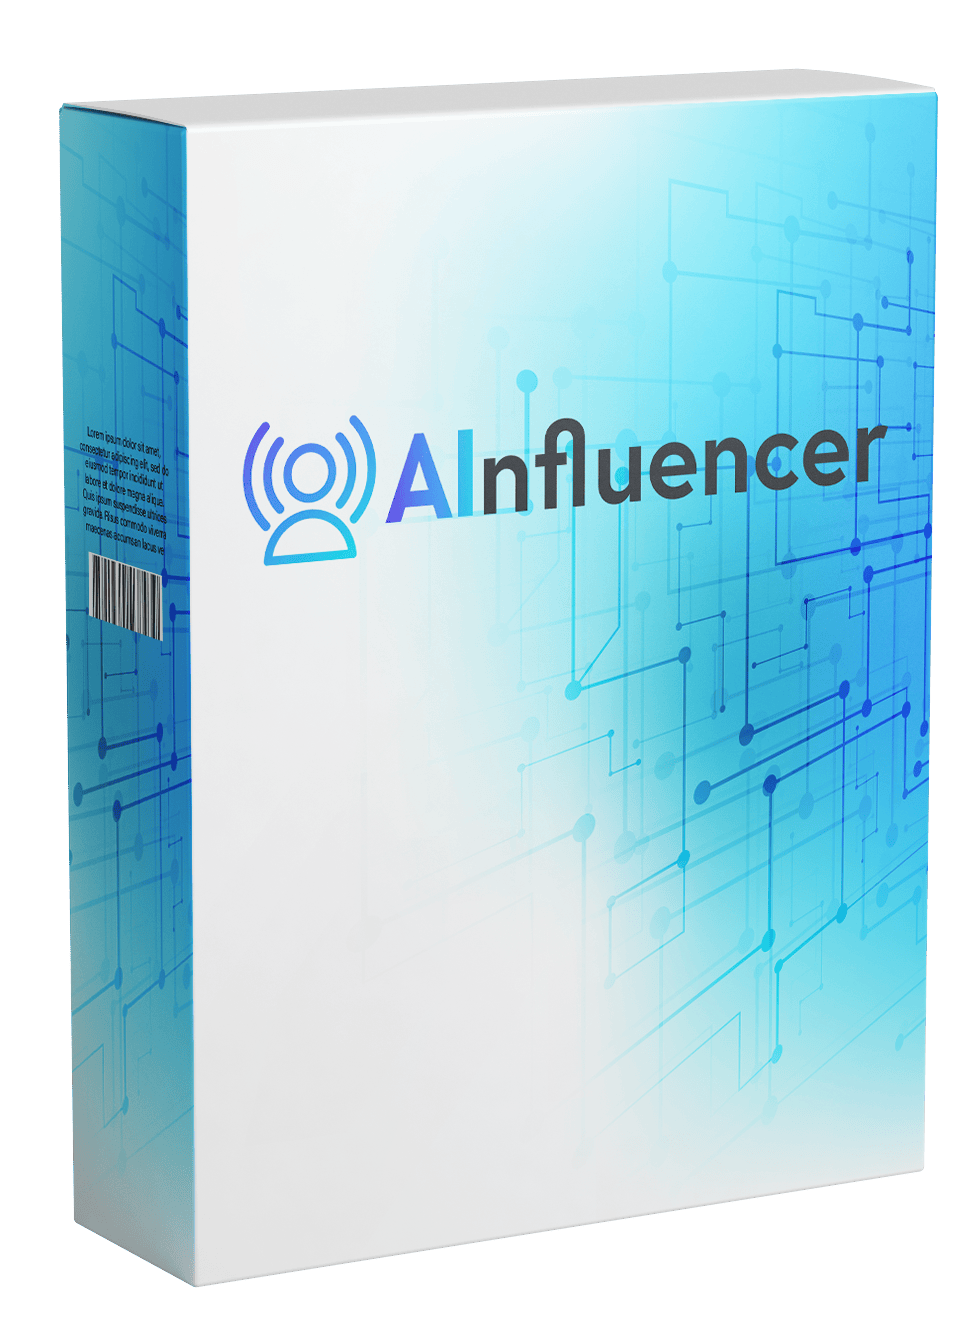 Title: The Rise of Influencer Marketing: Understanding the Alnfluencer Phenomenon